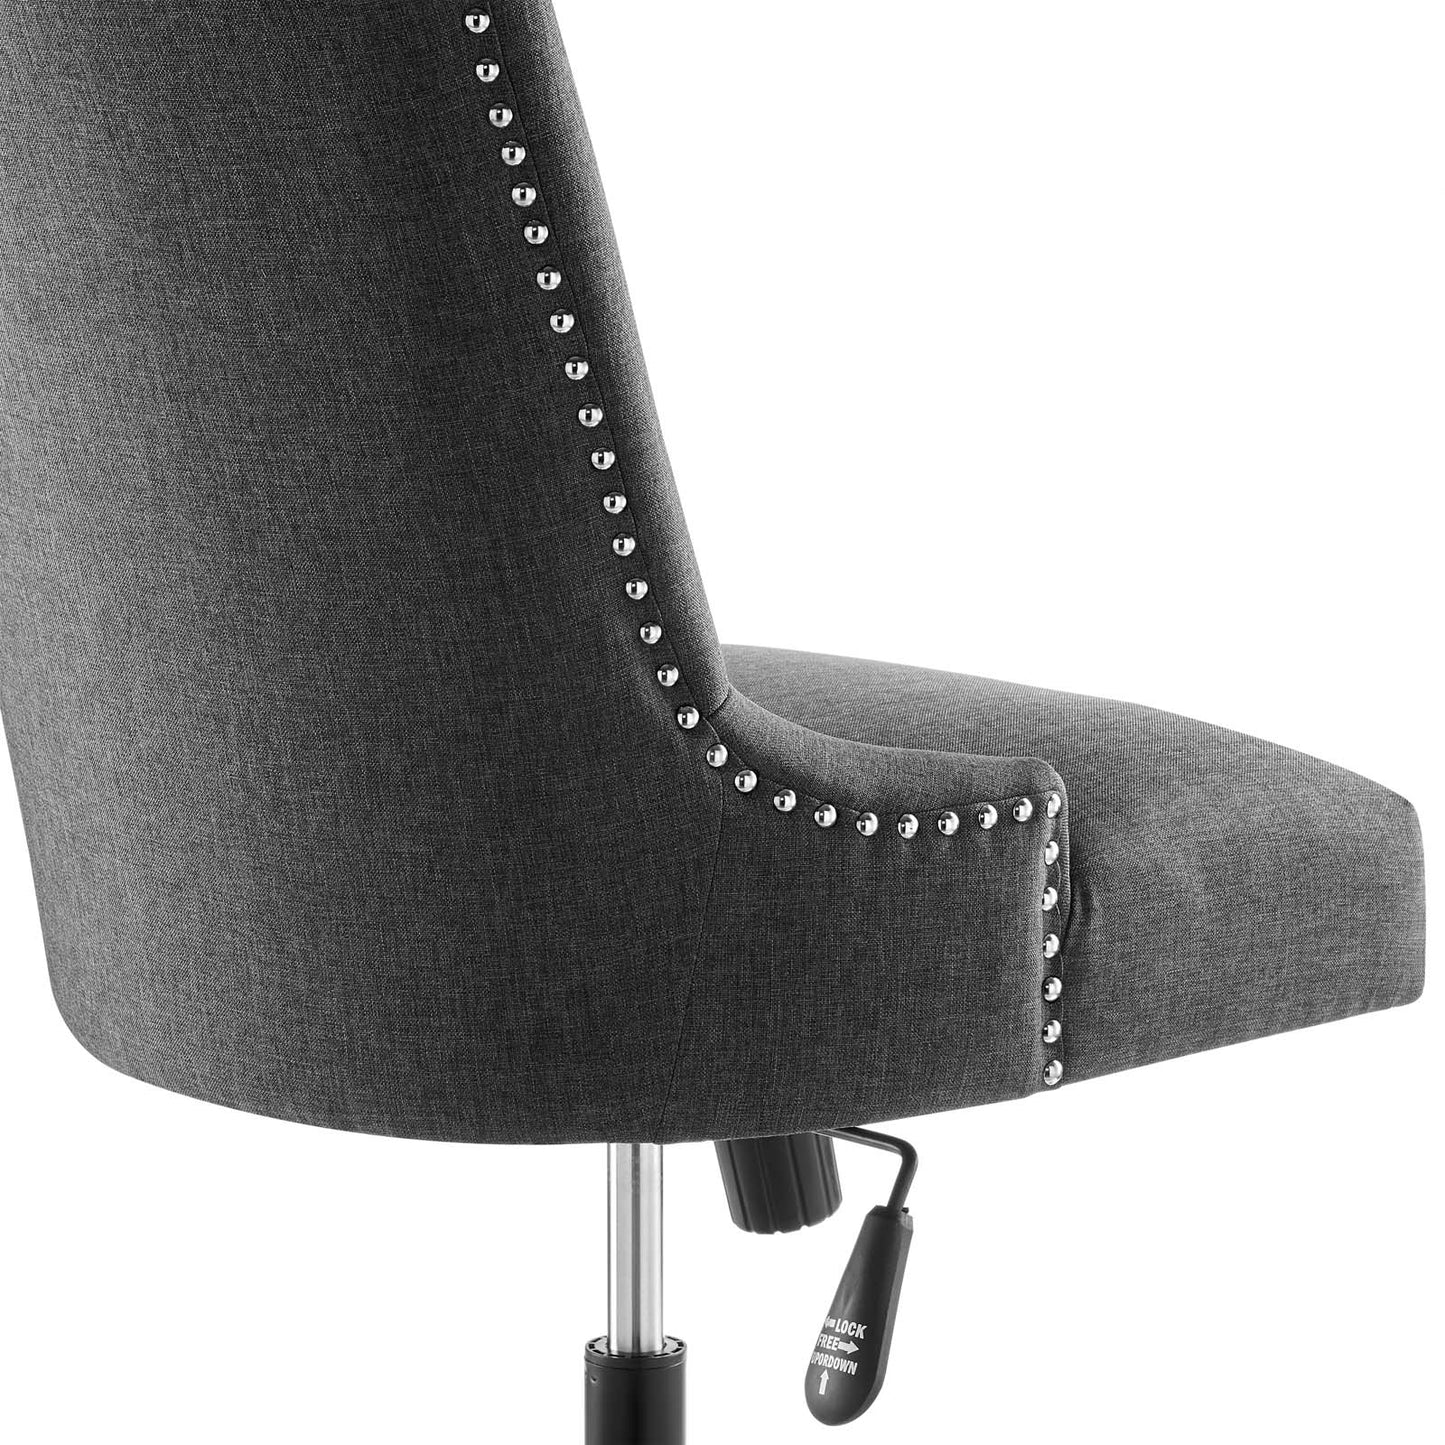 Empower Channel Tufted Fabric Office Chair Black Gray EEI-4576-BLK-GRY